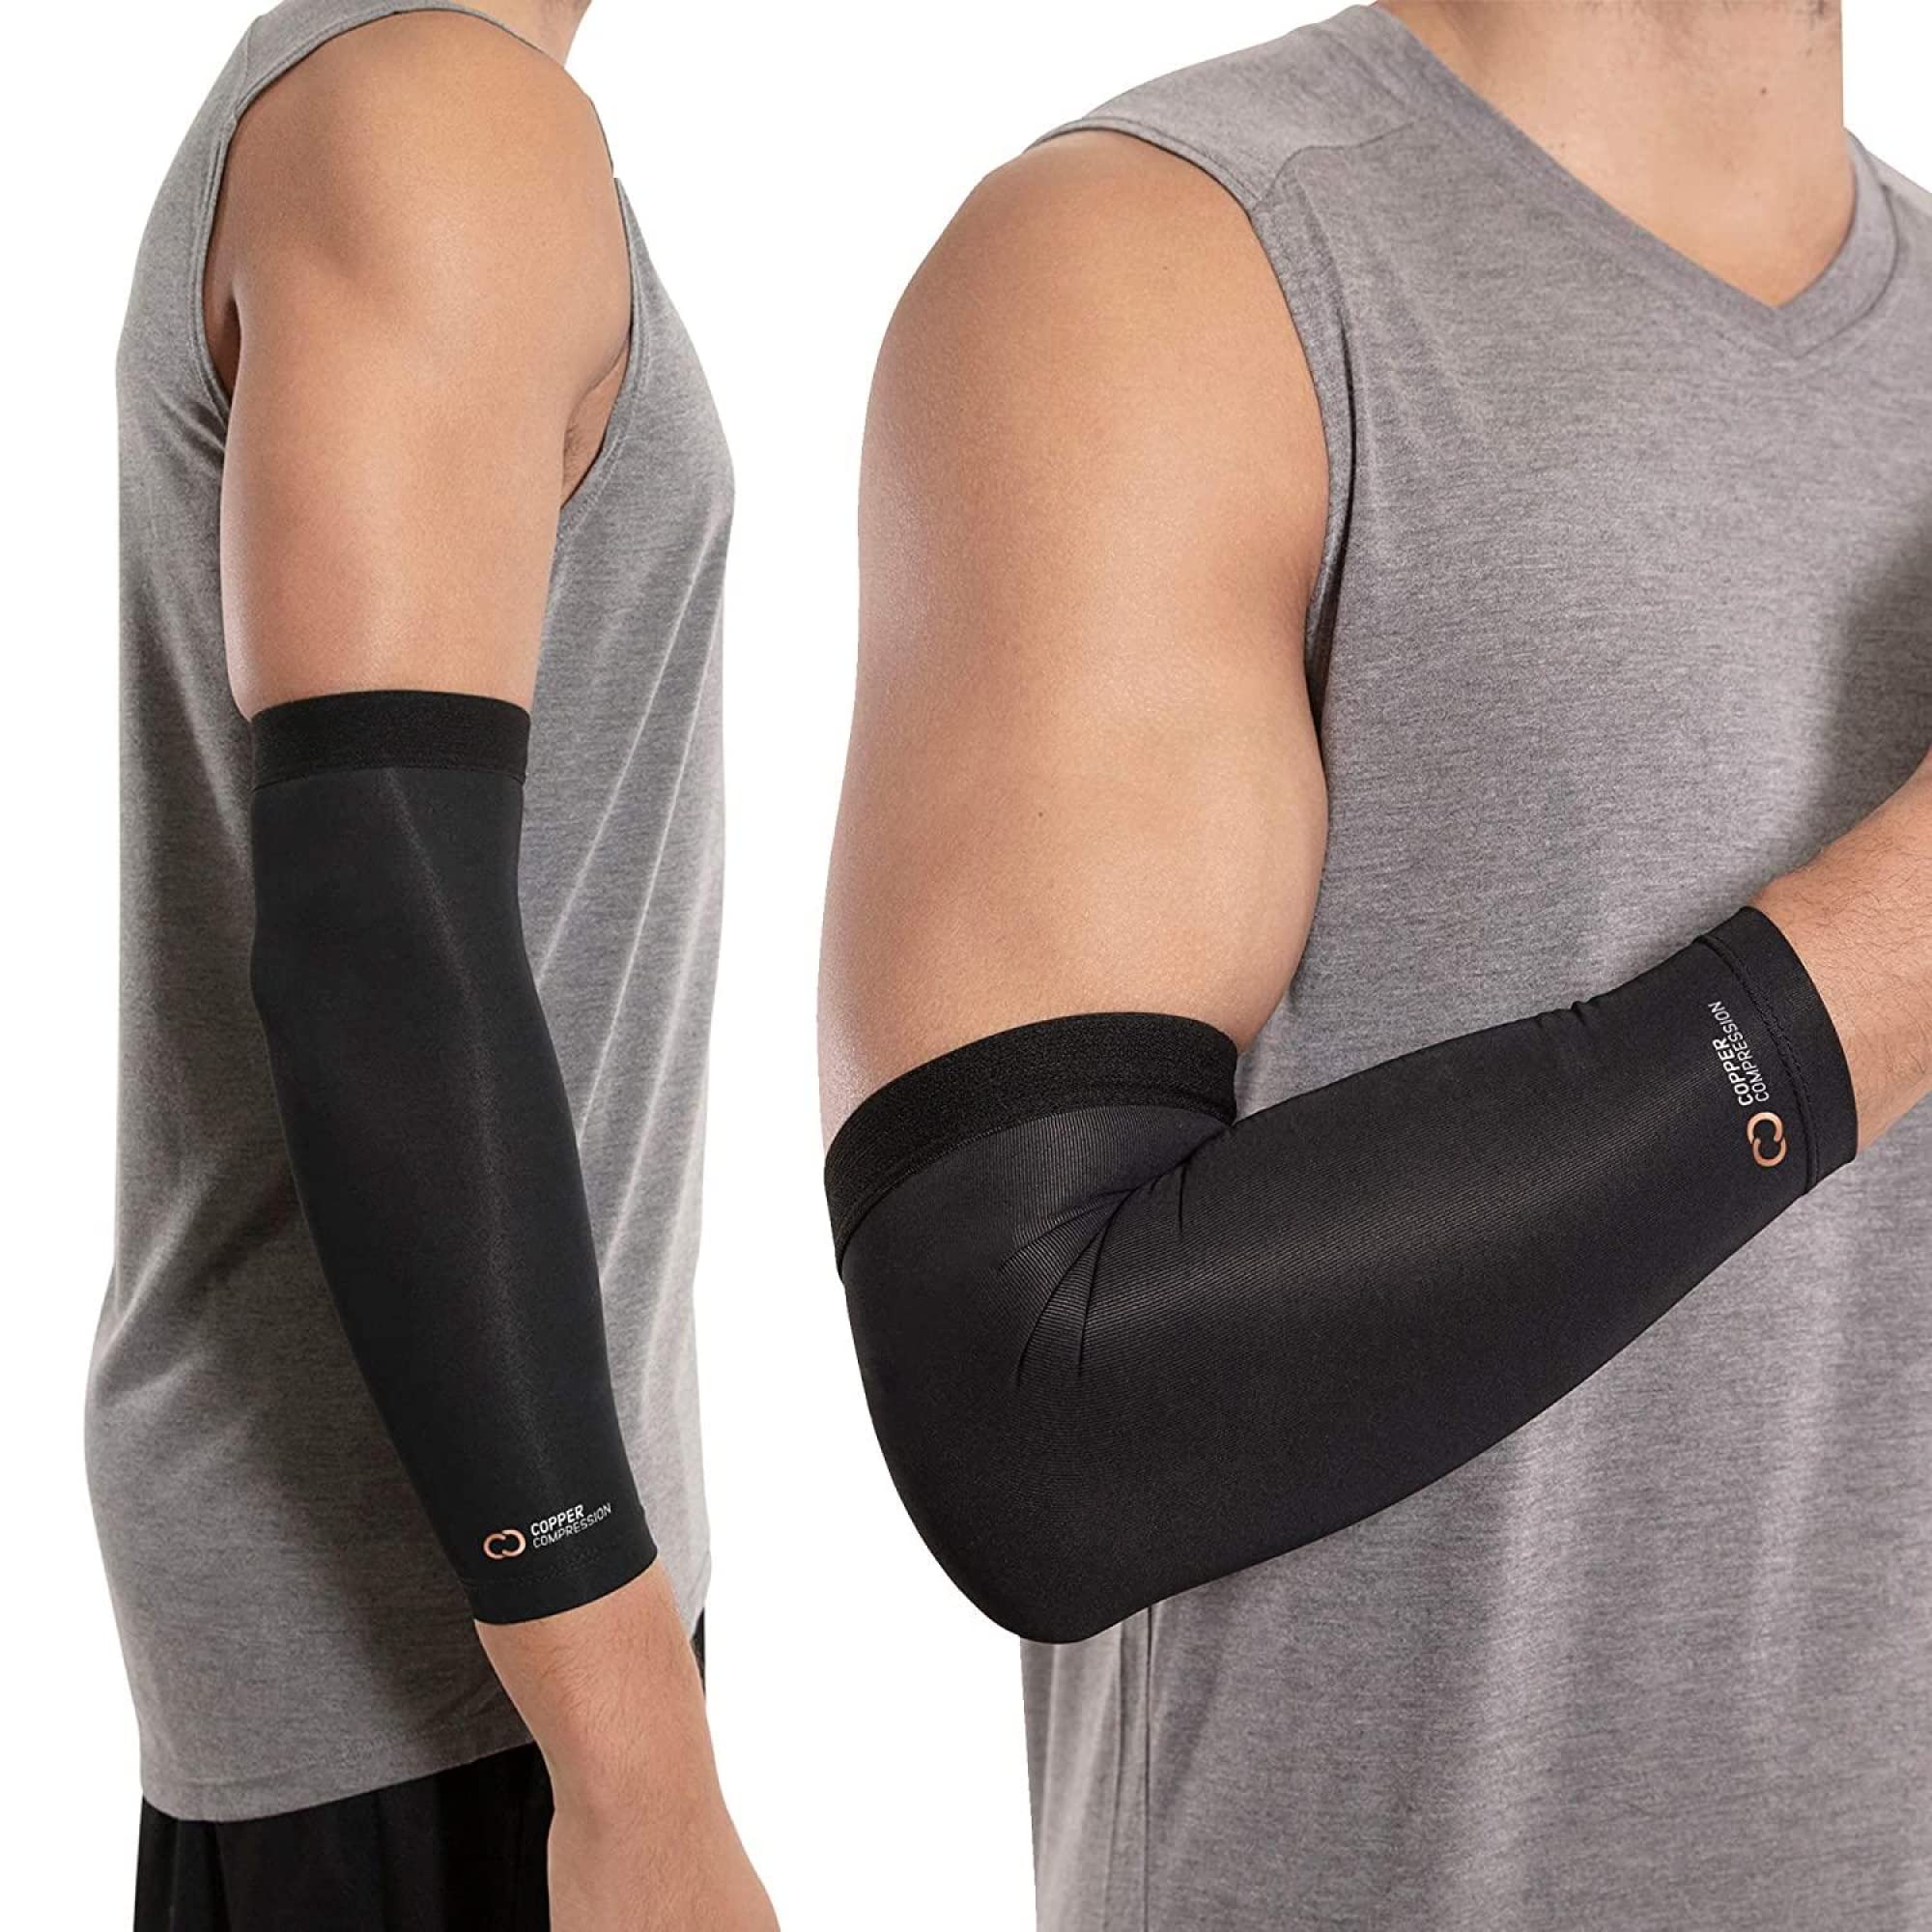 Copper Joe Compression Arm Brace Copper Infused Sleeve For Arms